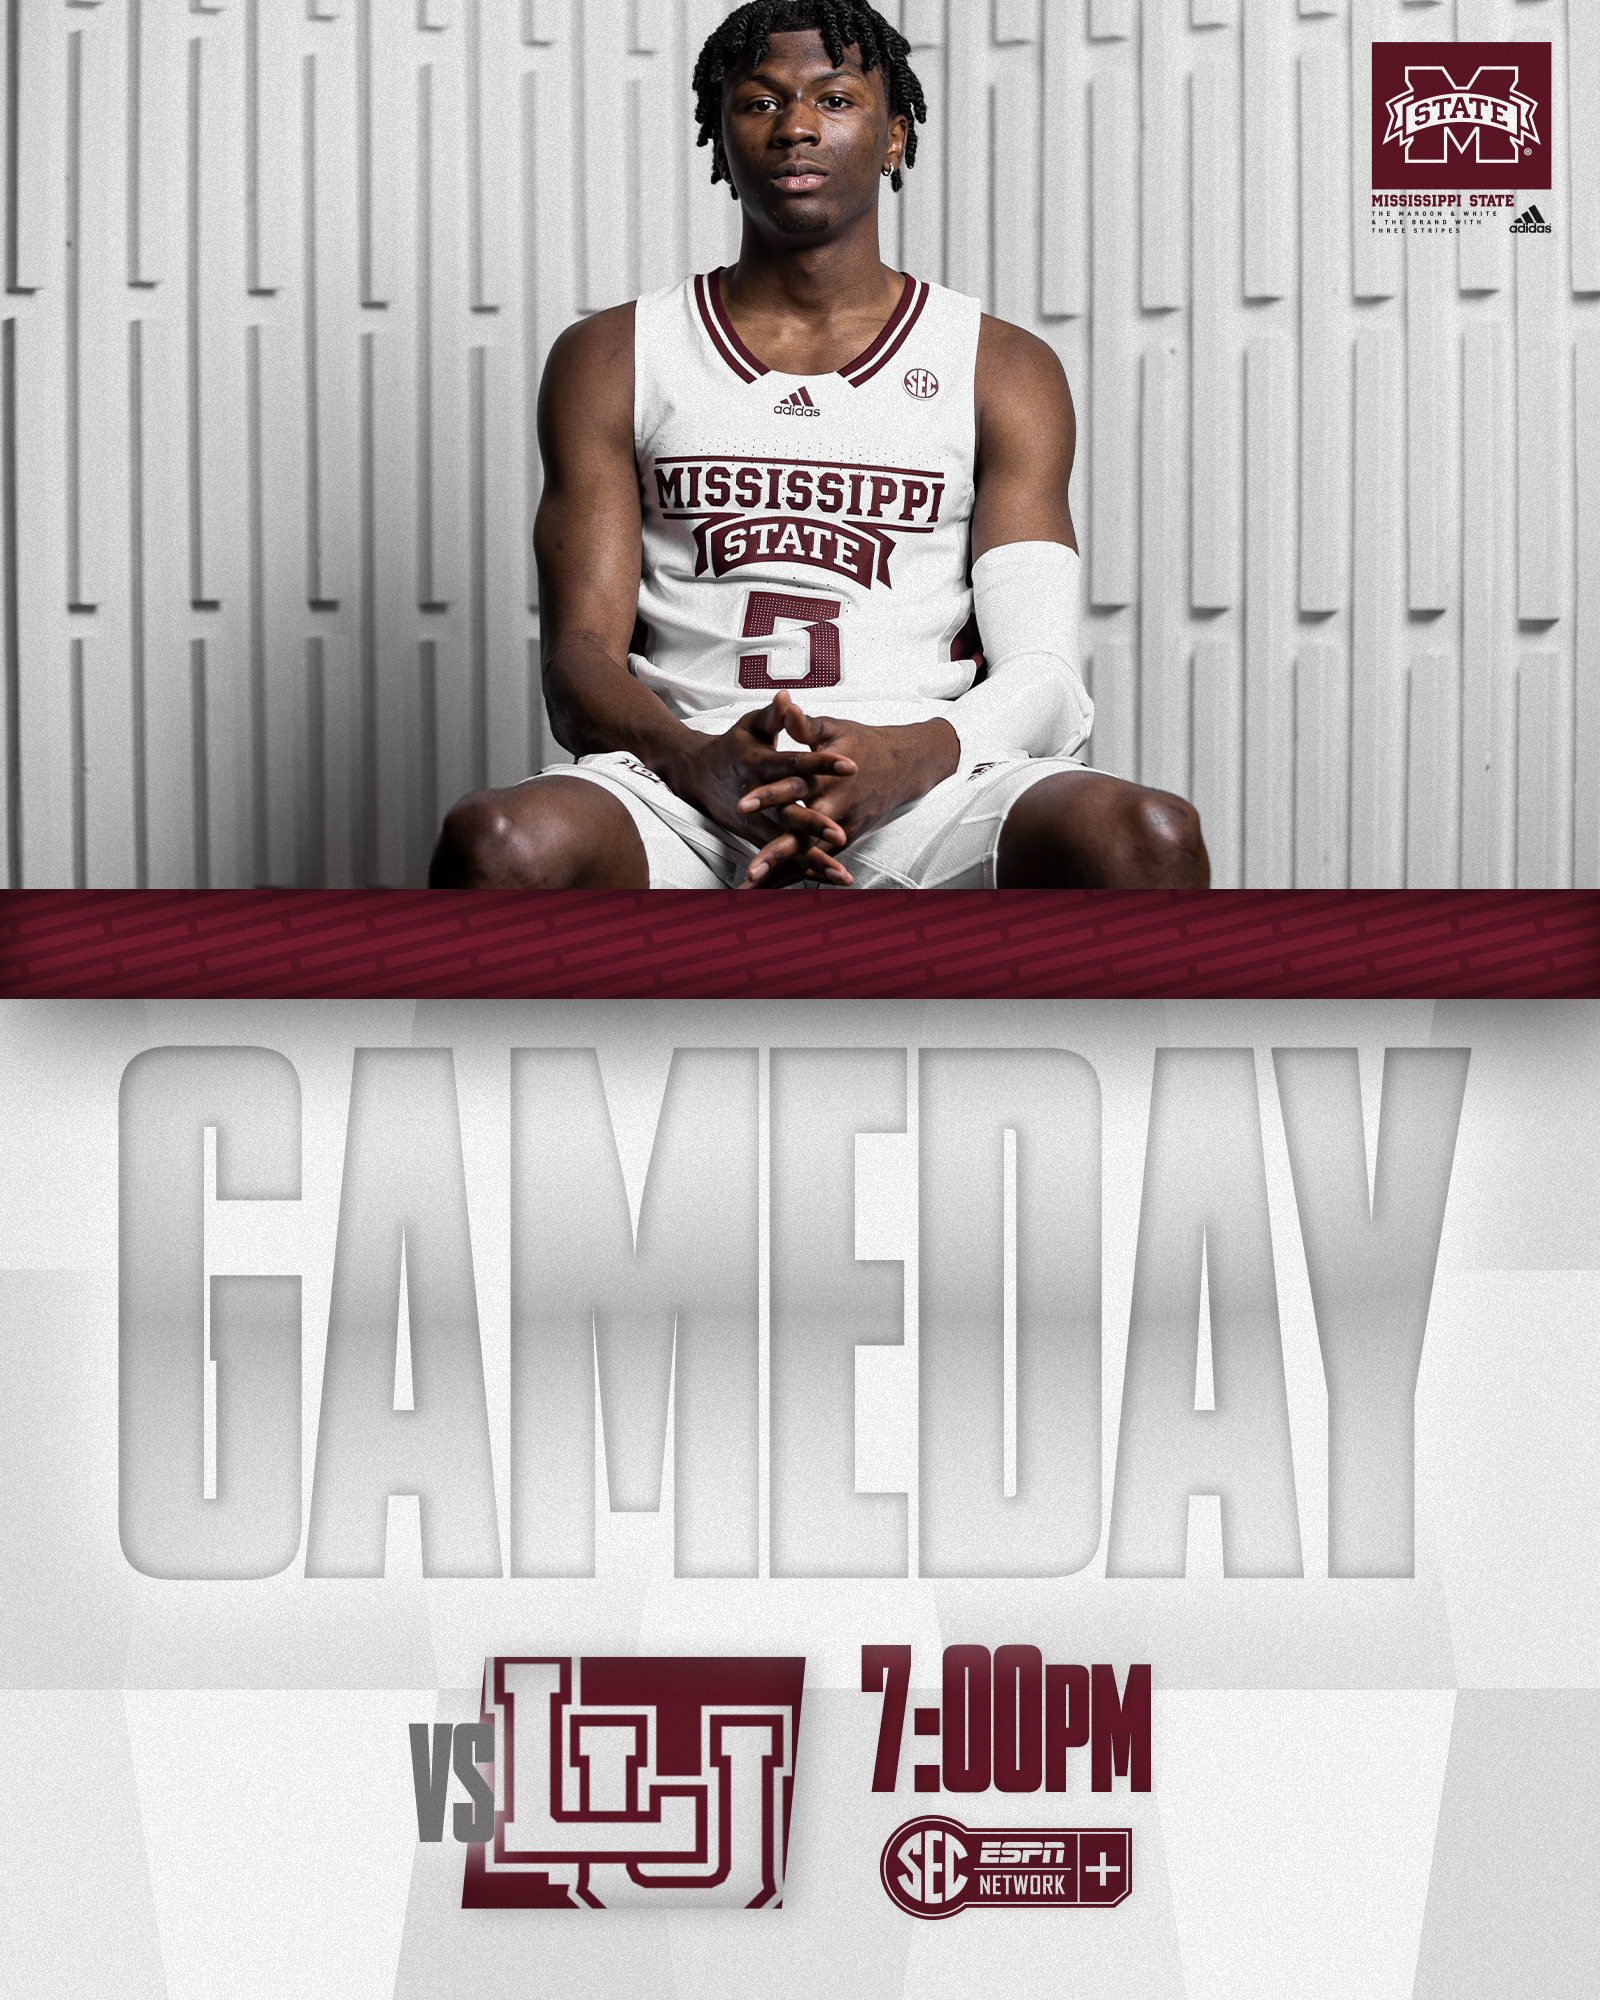 Maroon and white Next Home Game announcement graphic with image of MSU men's basketball player Cam Carter seated in front of a white wall